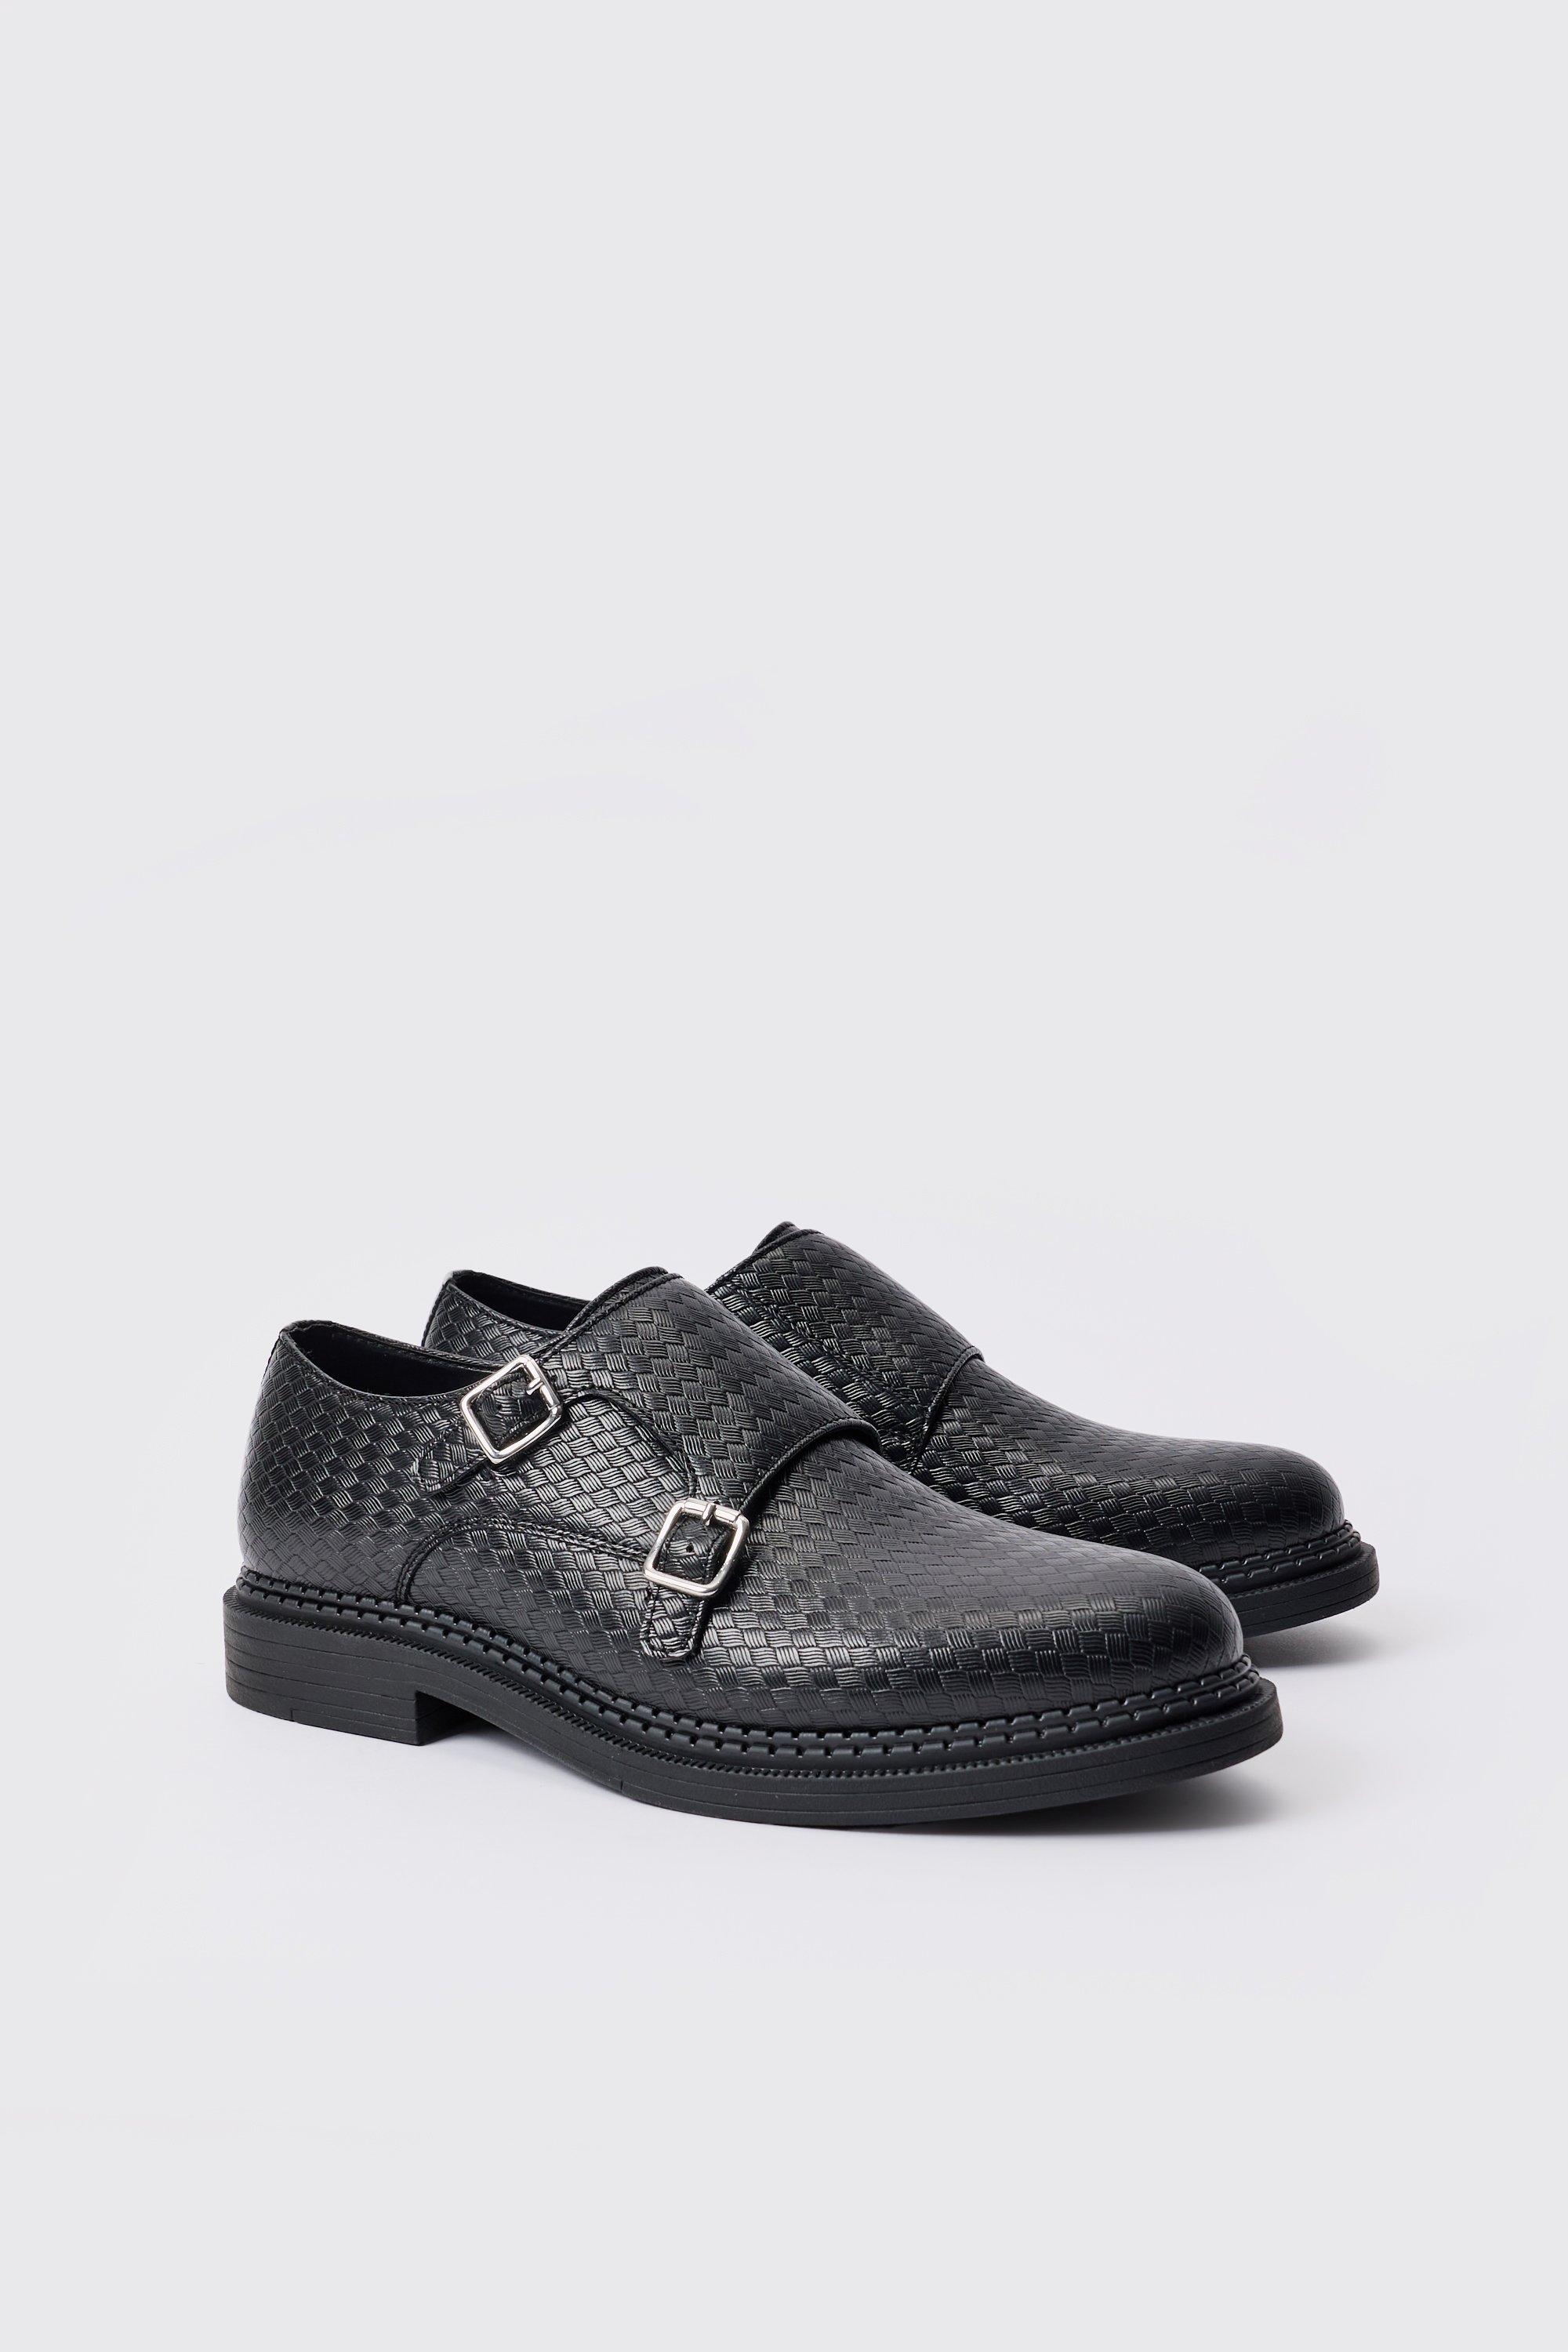 Image of Woven Pu Monk Strap Loafer In Black, Nero